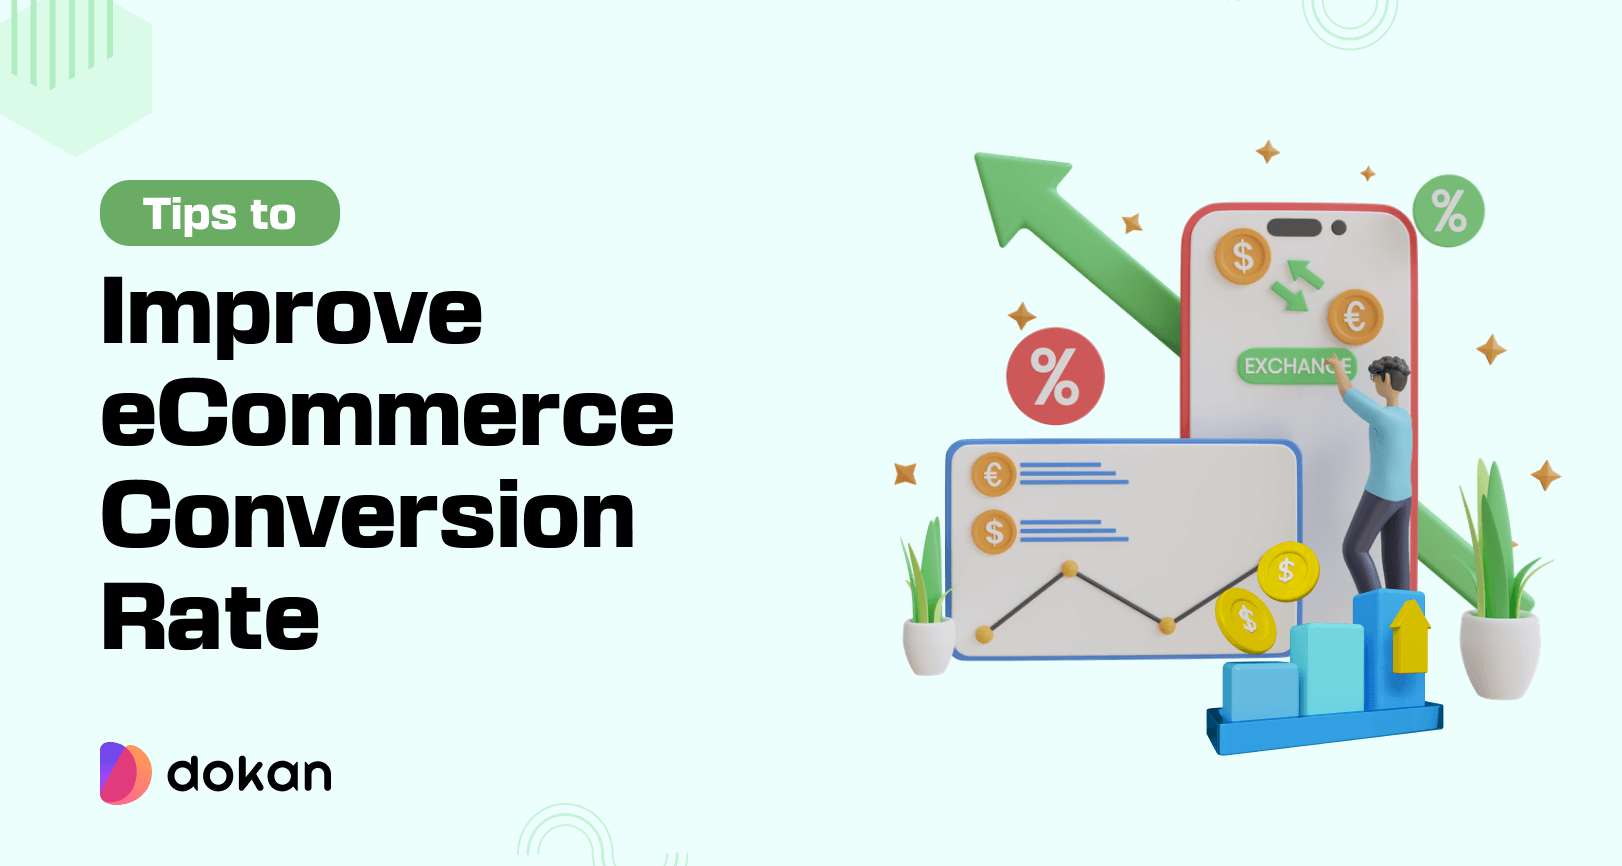 This is the feature image to improve eCommerce conversionrate